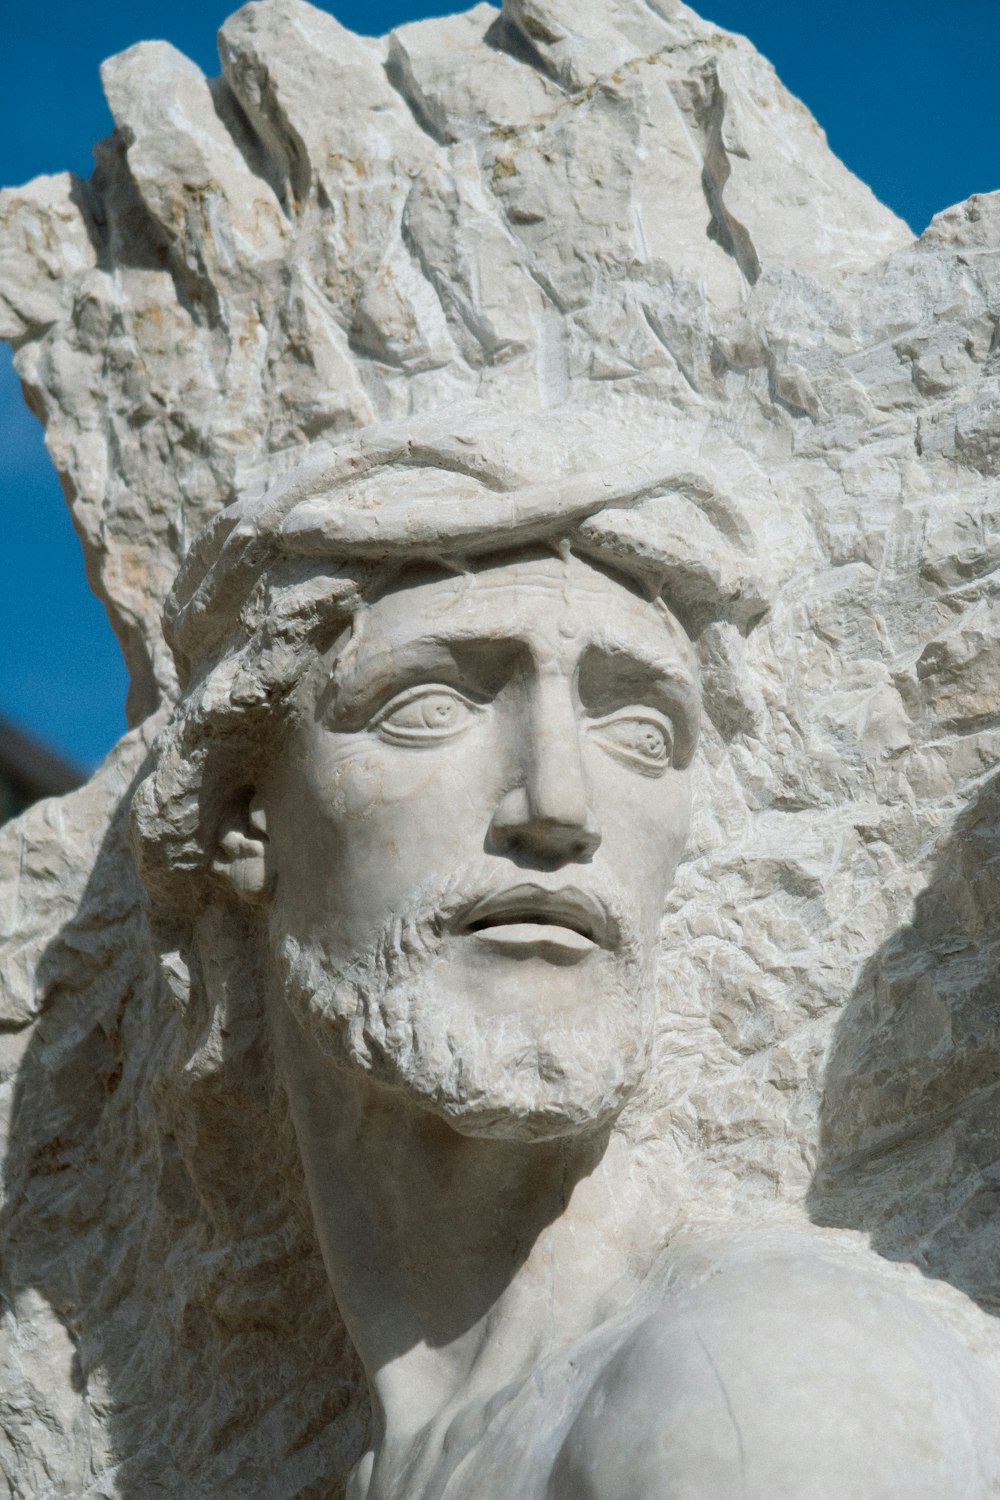 a close up of a statue of a man with a hat